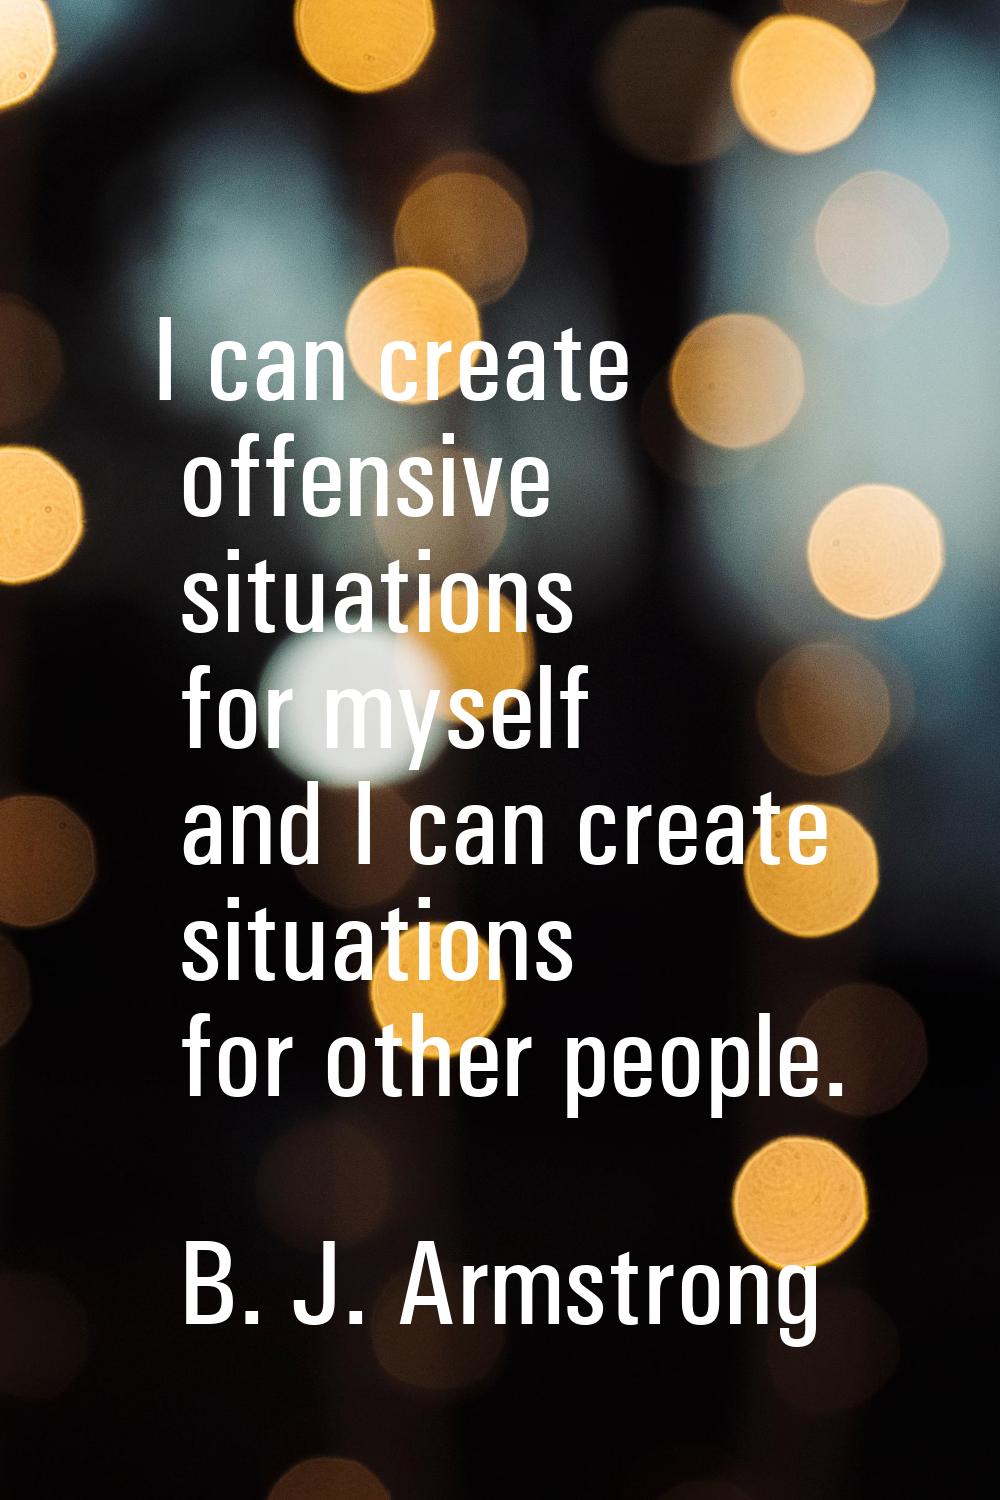 I can create offensive situations for myself and I can create situations for other people.